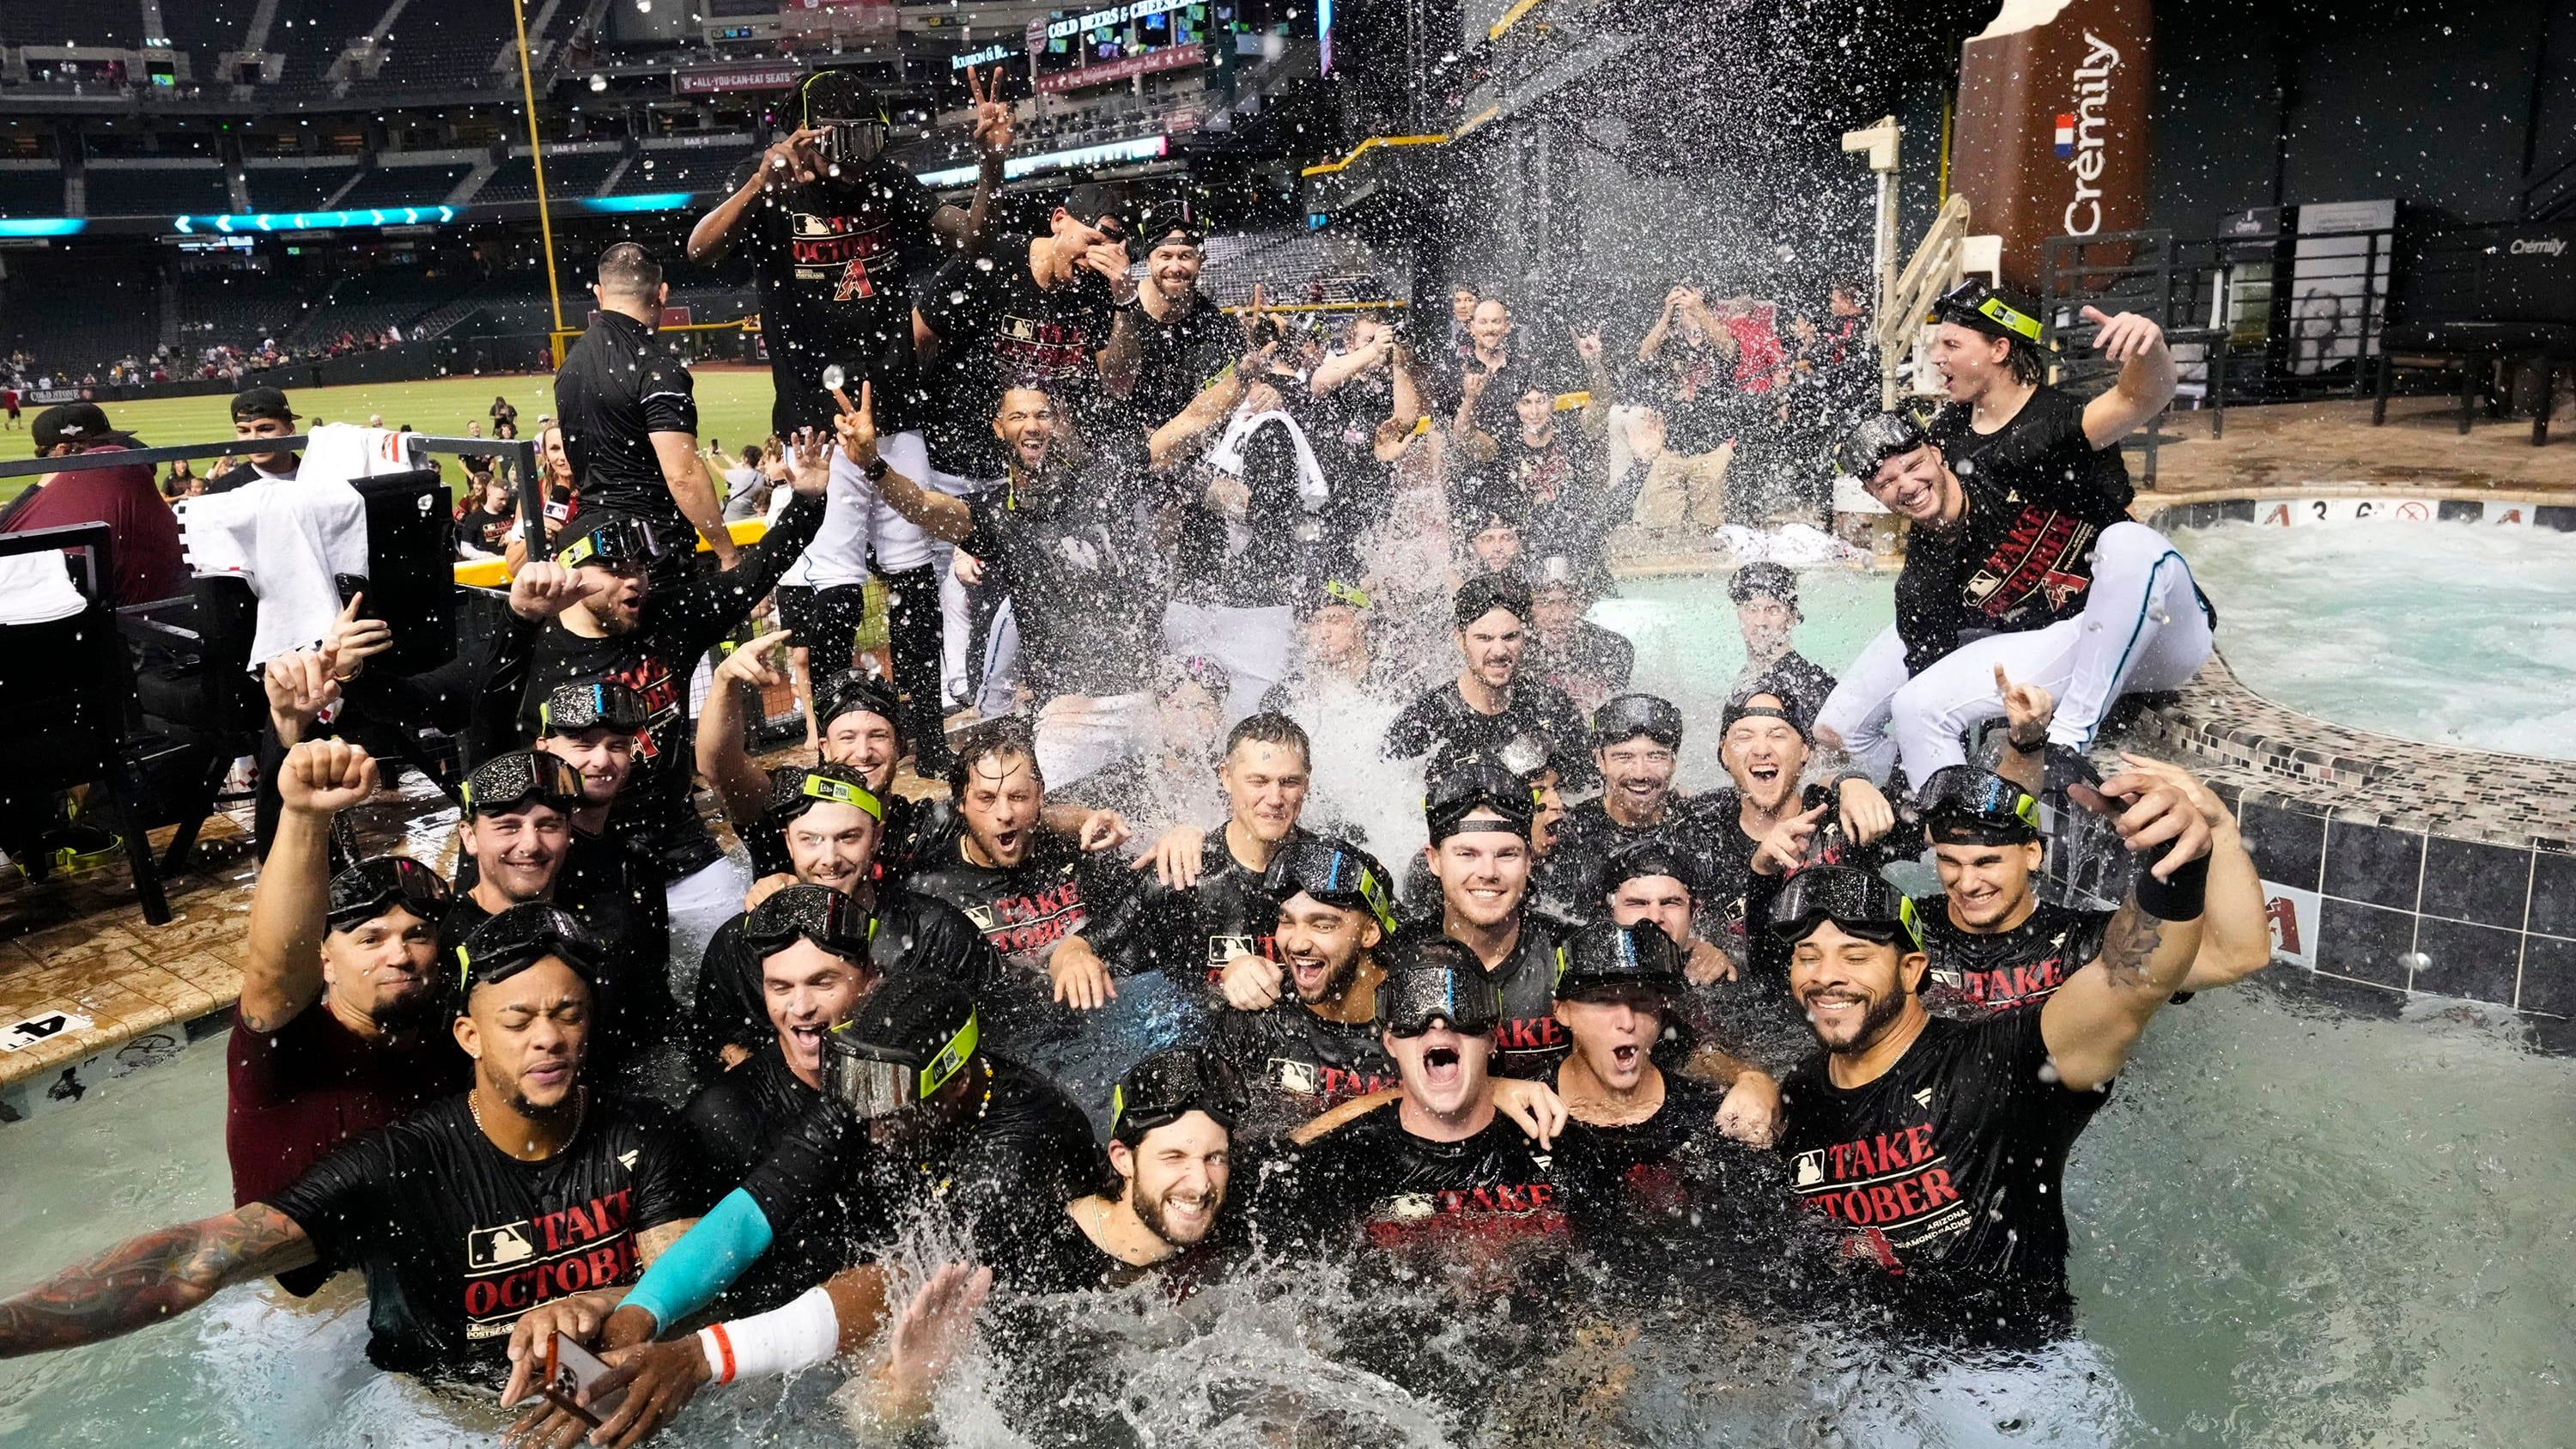 The Arizona Diamondbacks players celebrate in the outfield pool after clinching a wild card playoff